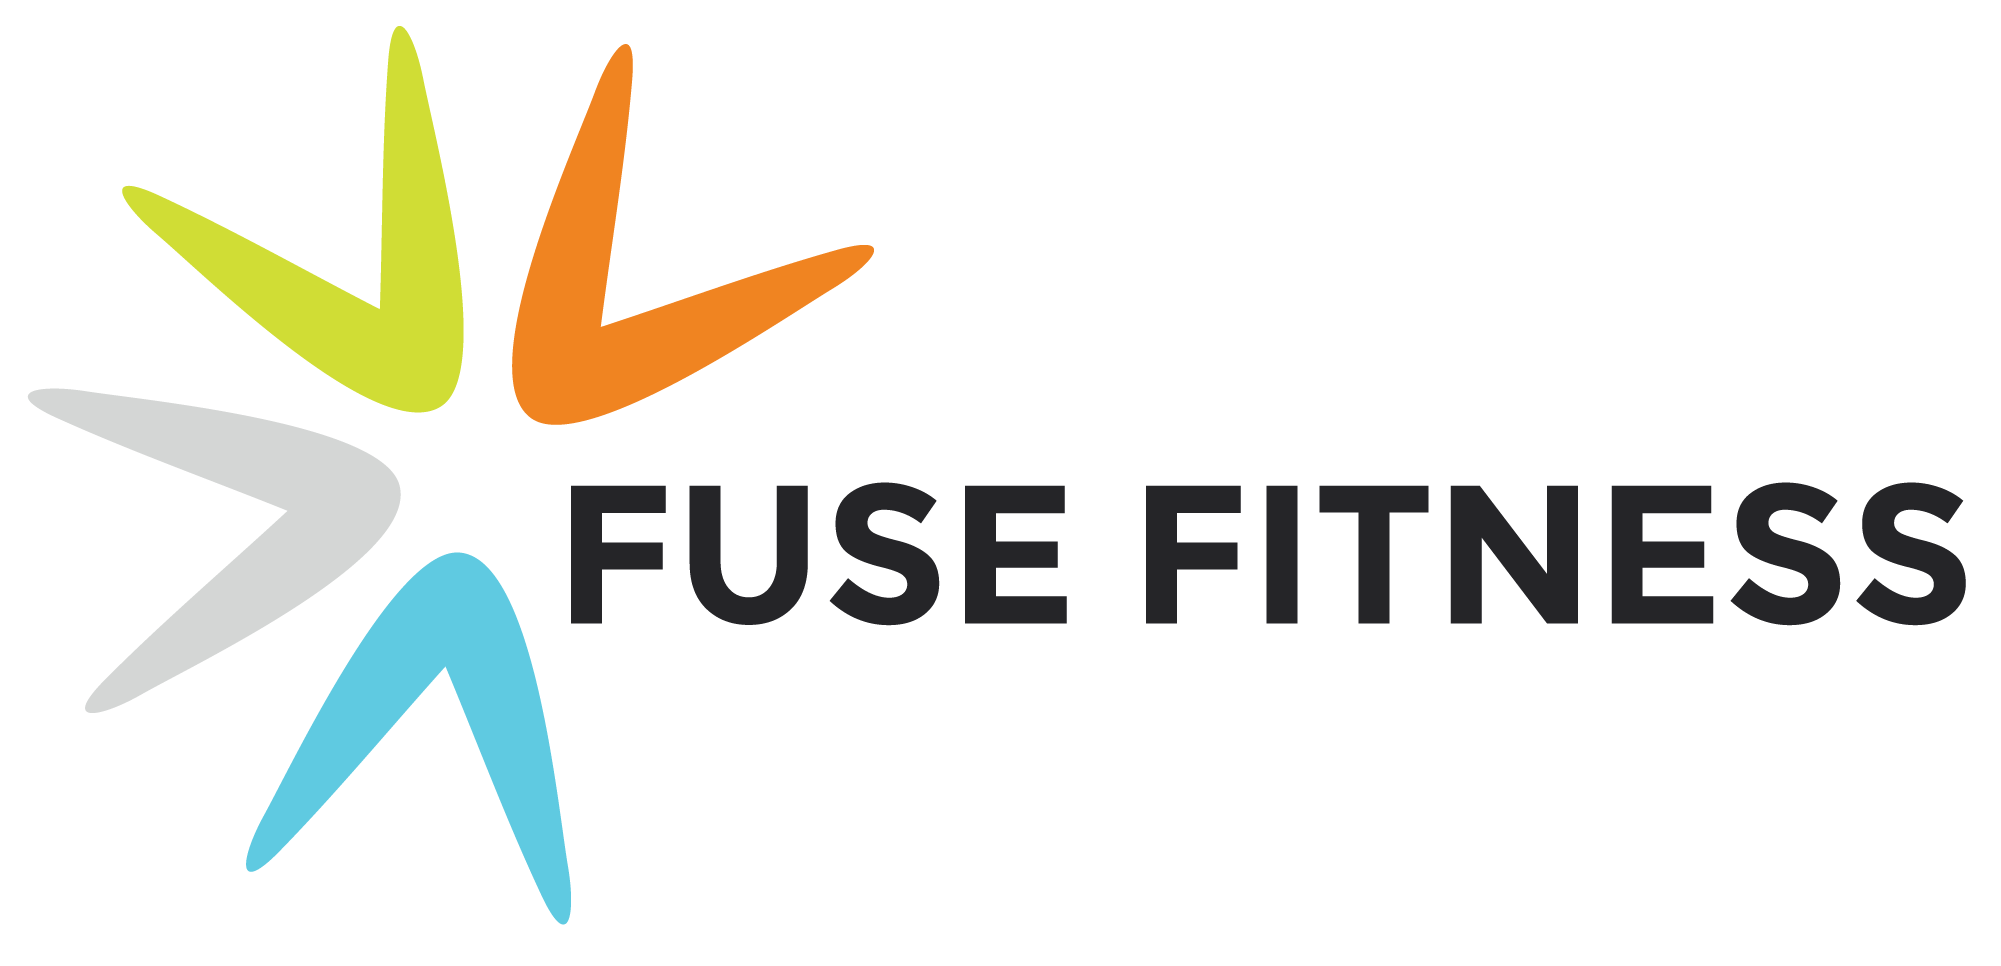 The Fuse Fitness